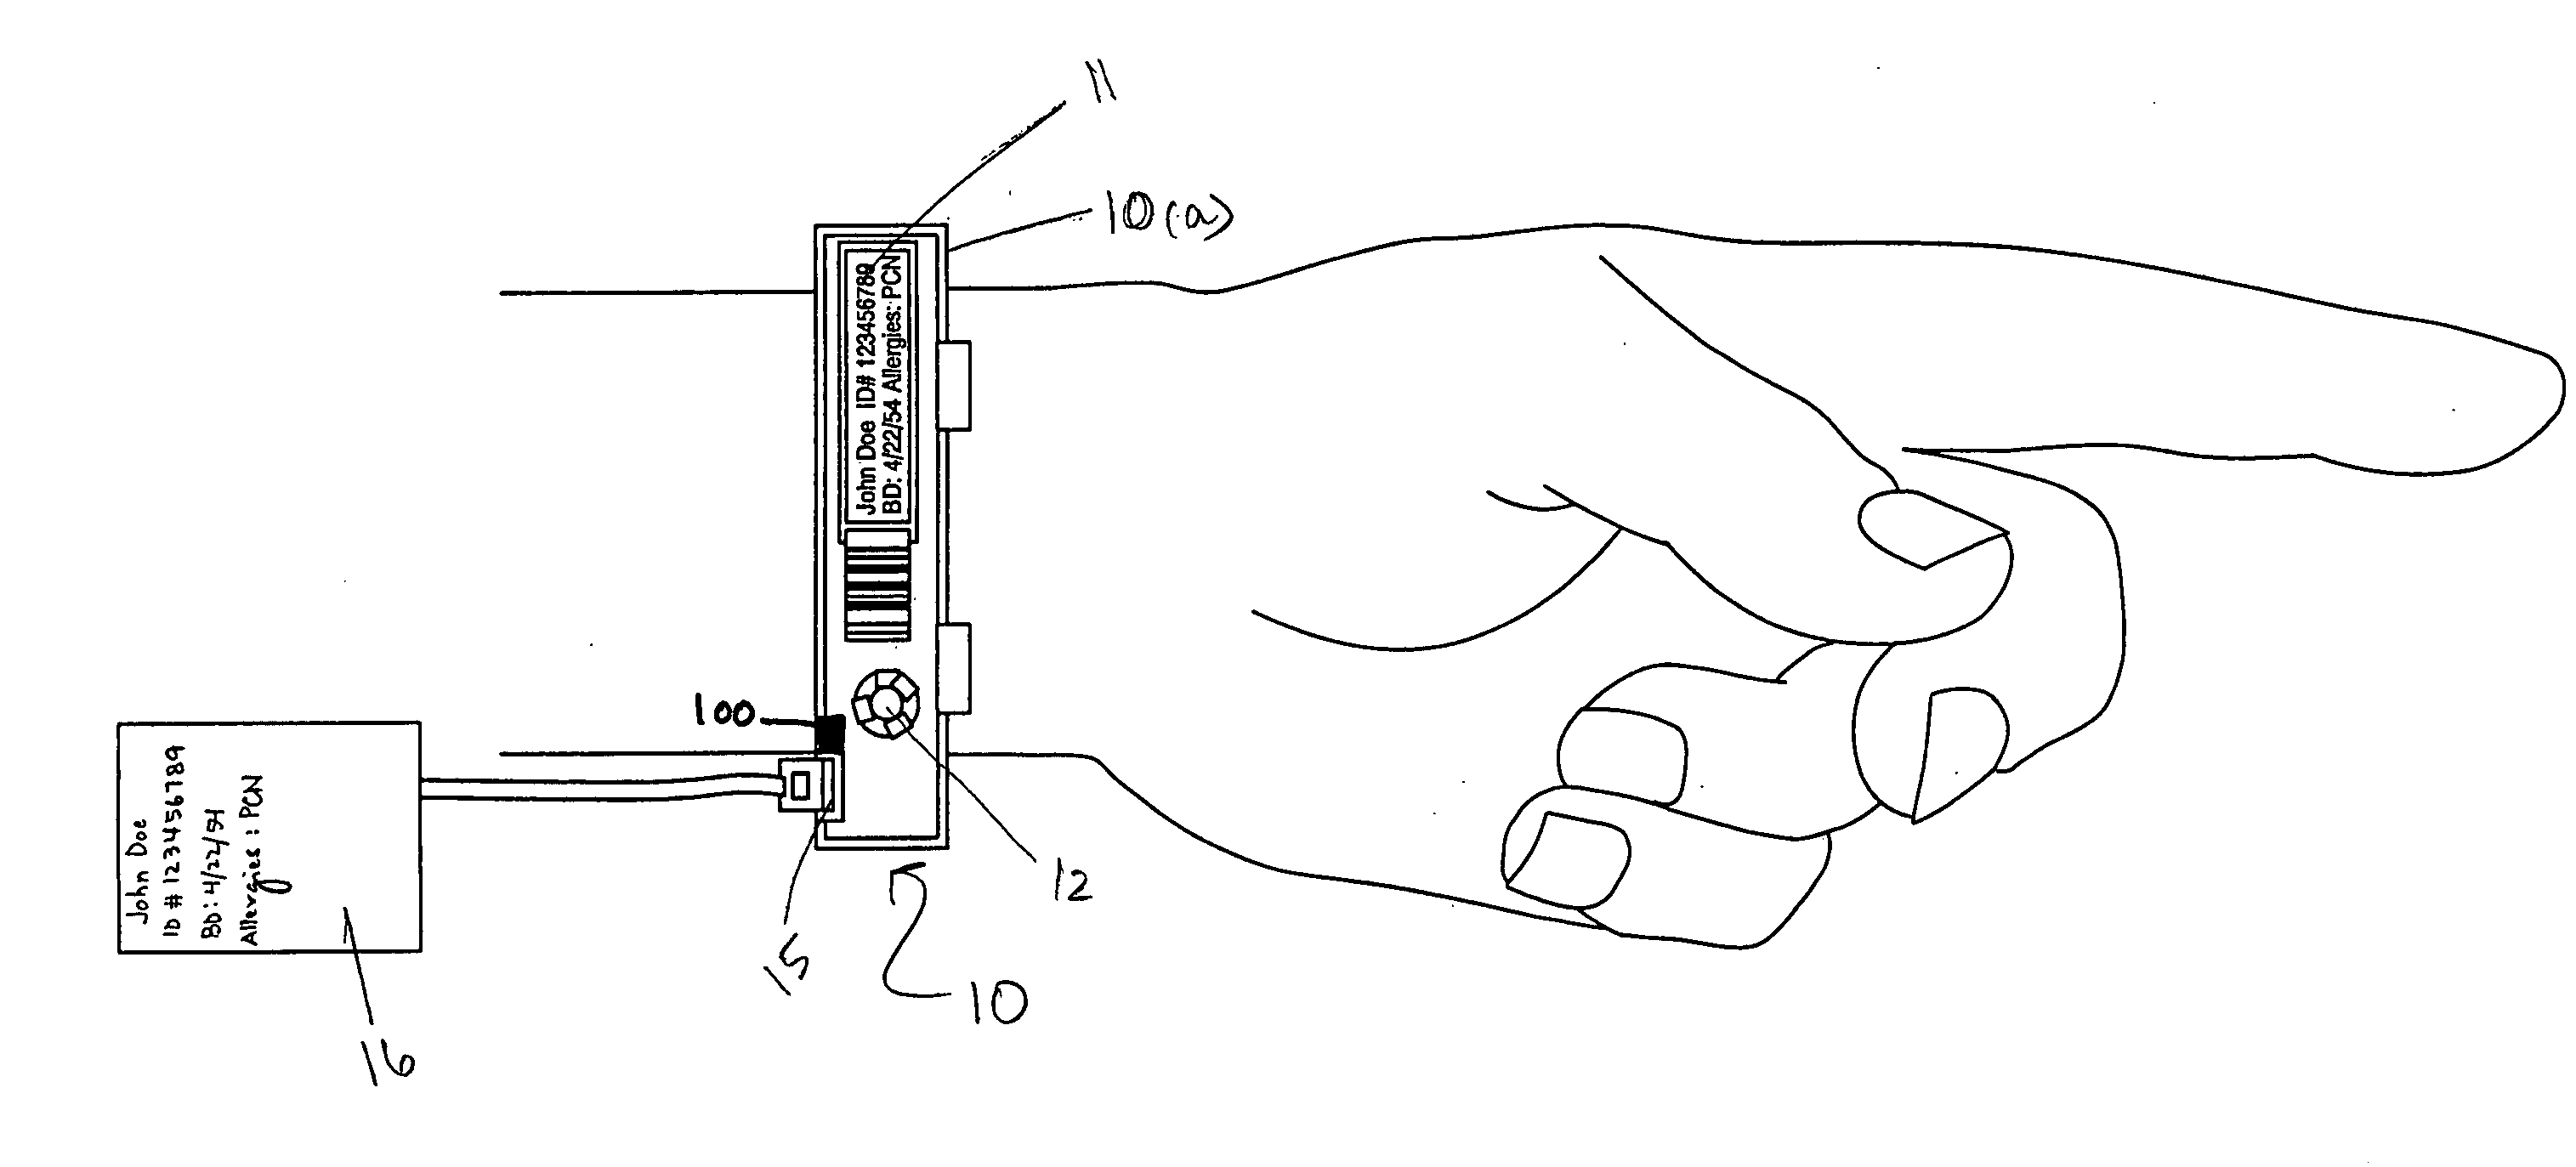 Integrated patient diagnostic and identification system